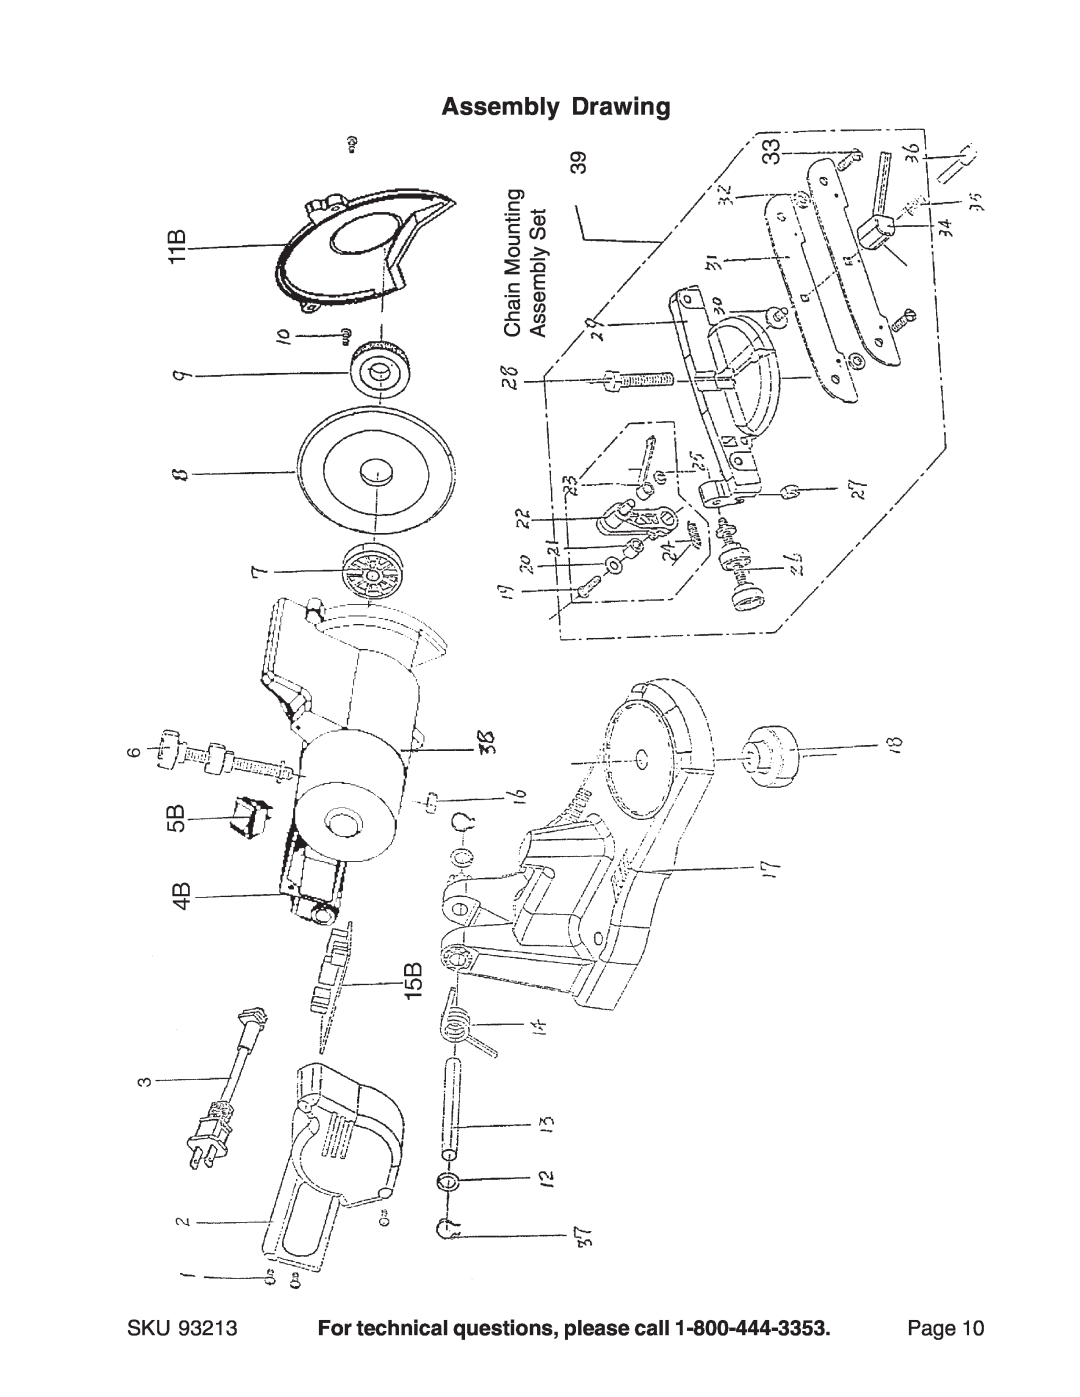 Harbor Freight Tools 93213 manual Assembly Drawing, Chain Mounting Assembly Set, For technical questions, please call, Page 